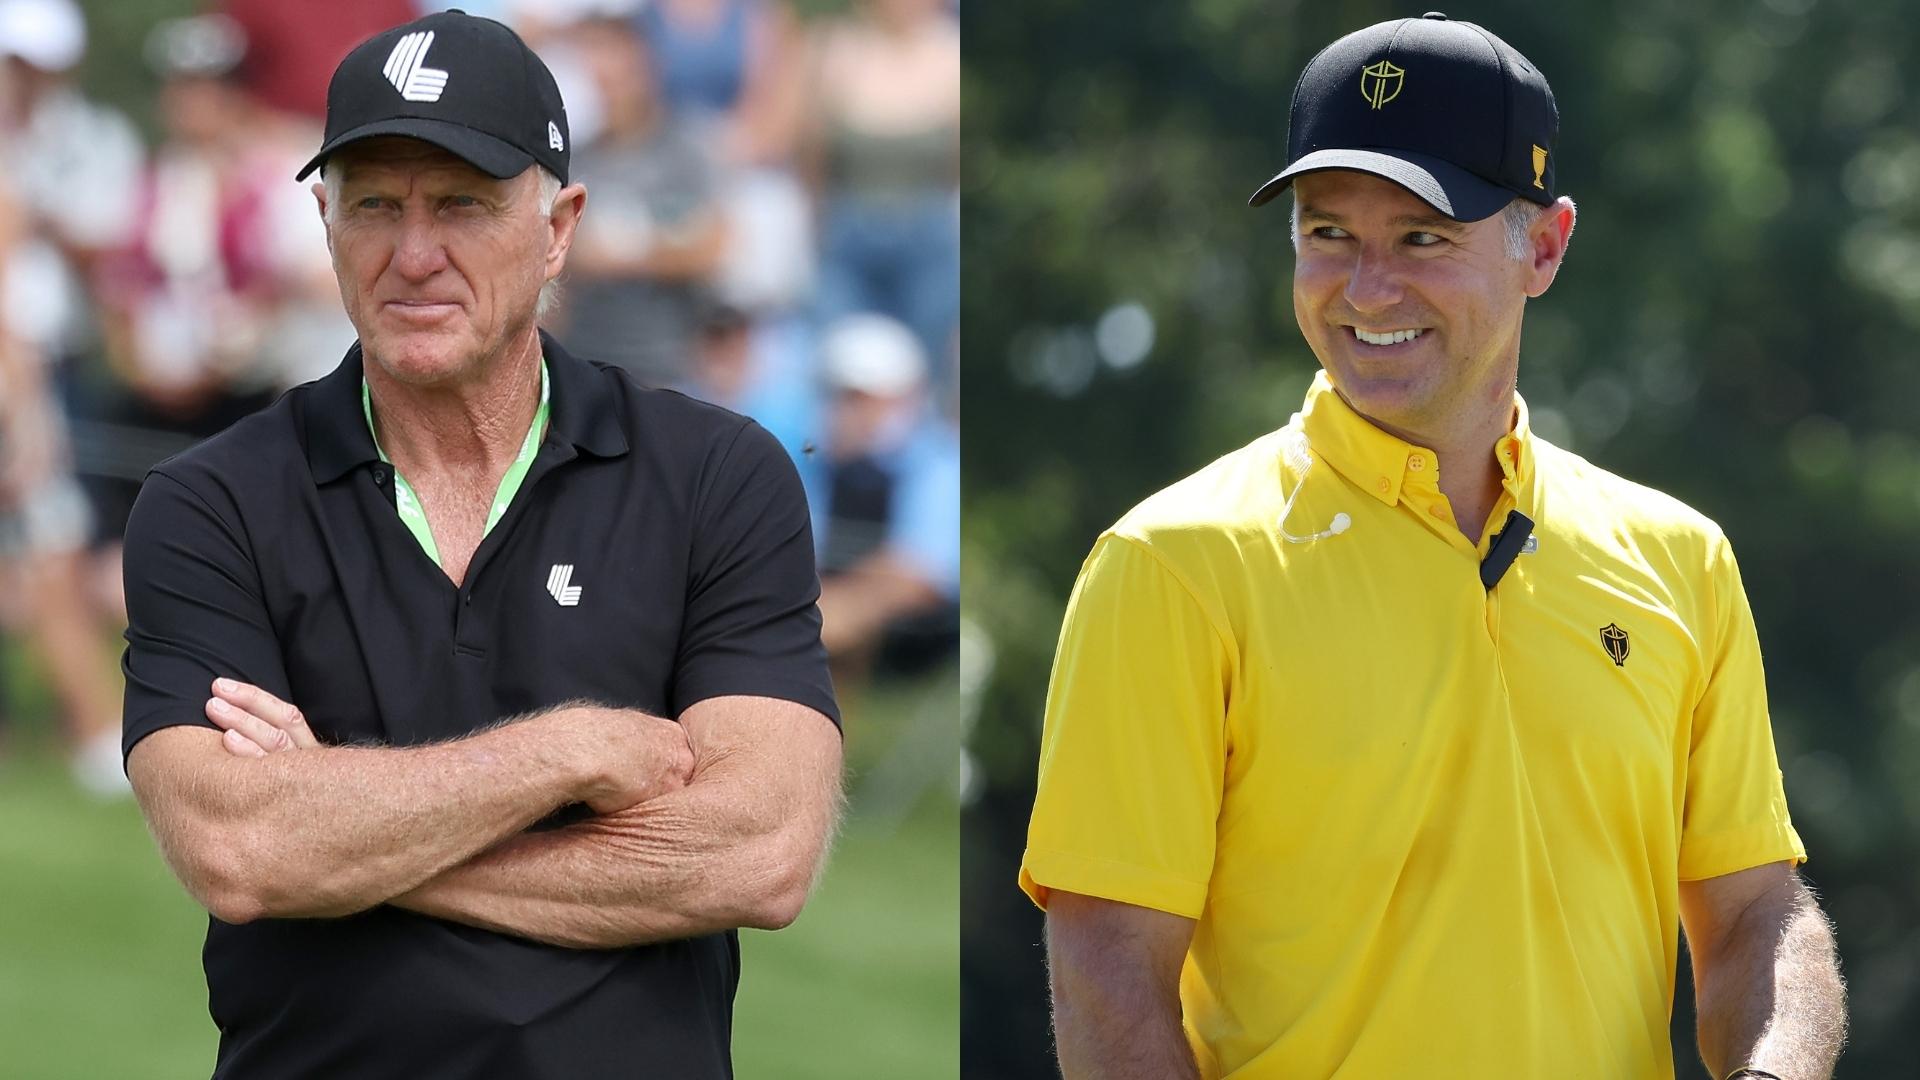 Trevor Immelman shares simple clap back to Greg Norman’s good luck message